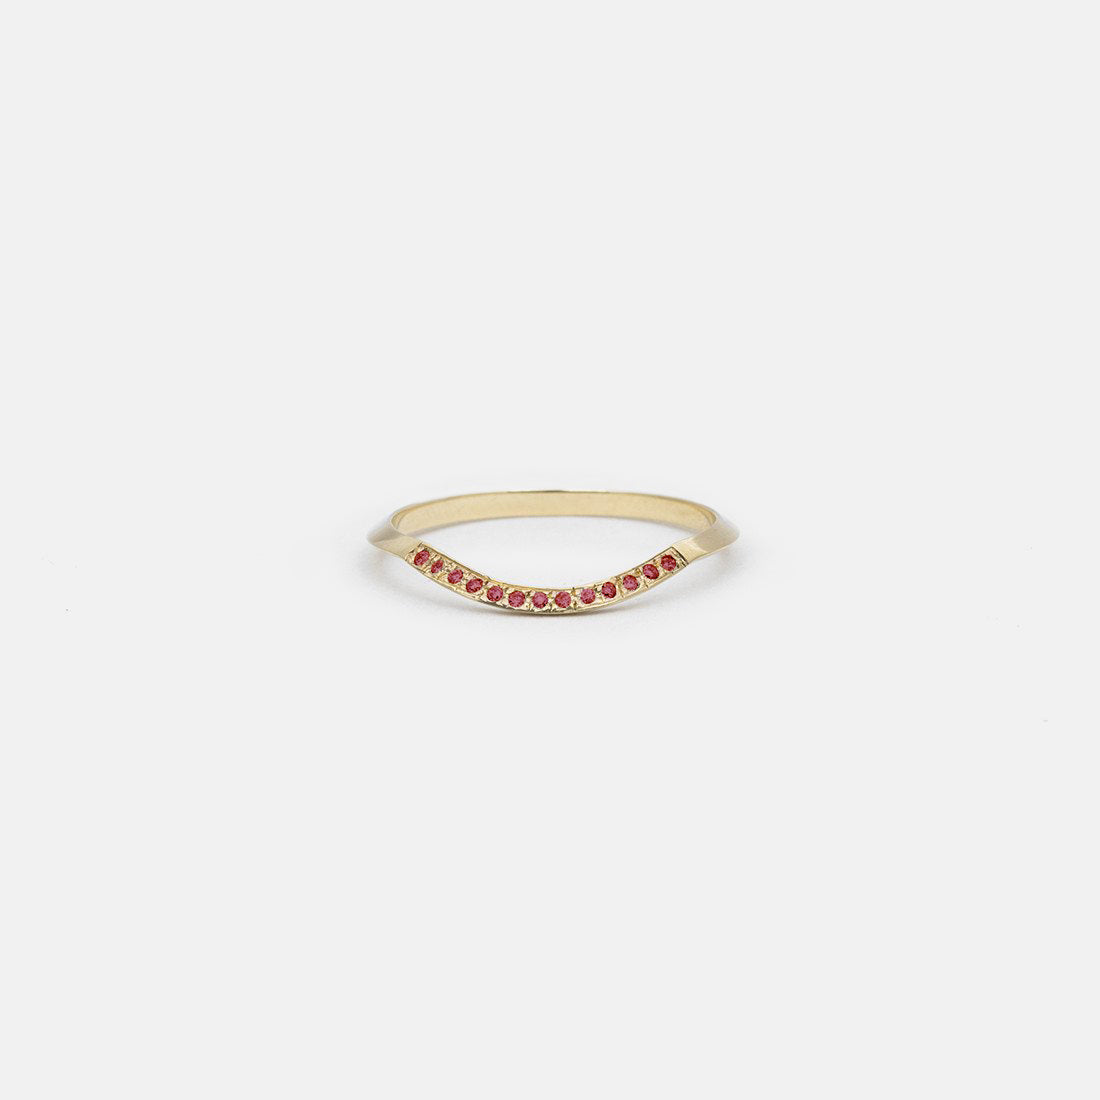 Arba Unique Ring in 14k Gold set with Rubies By SHW Fine Jewelry NYC